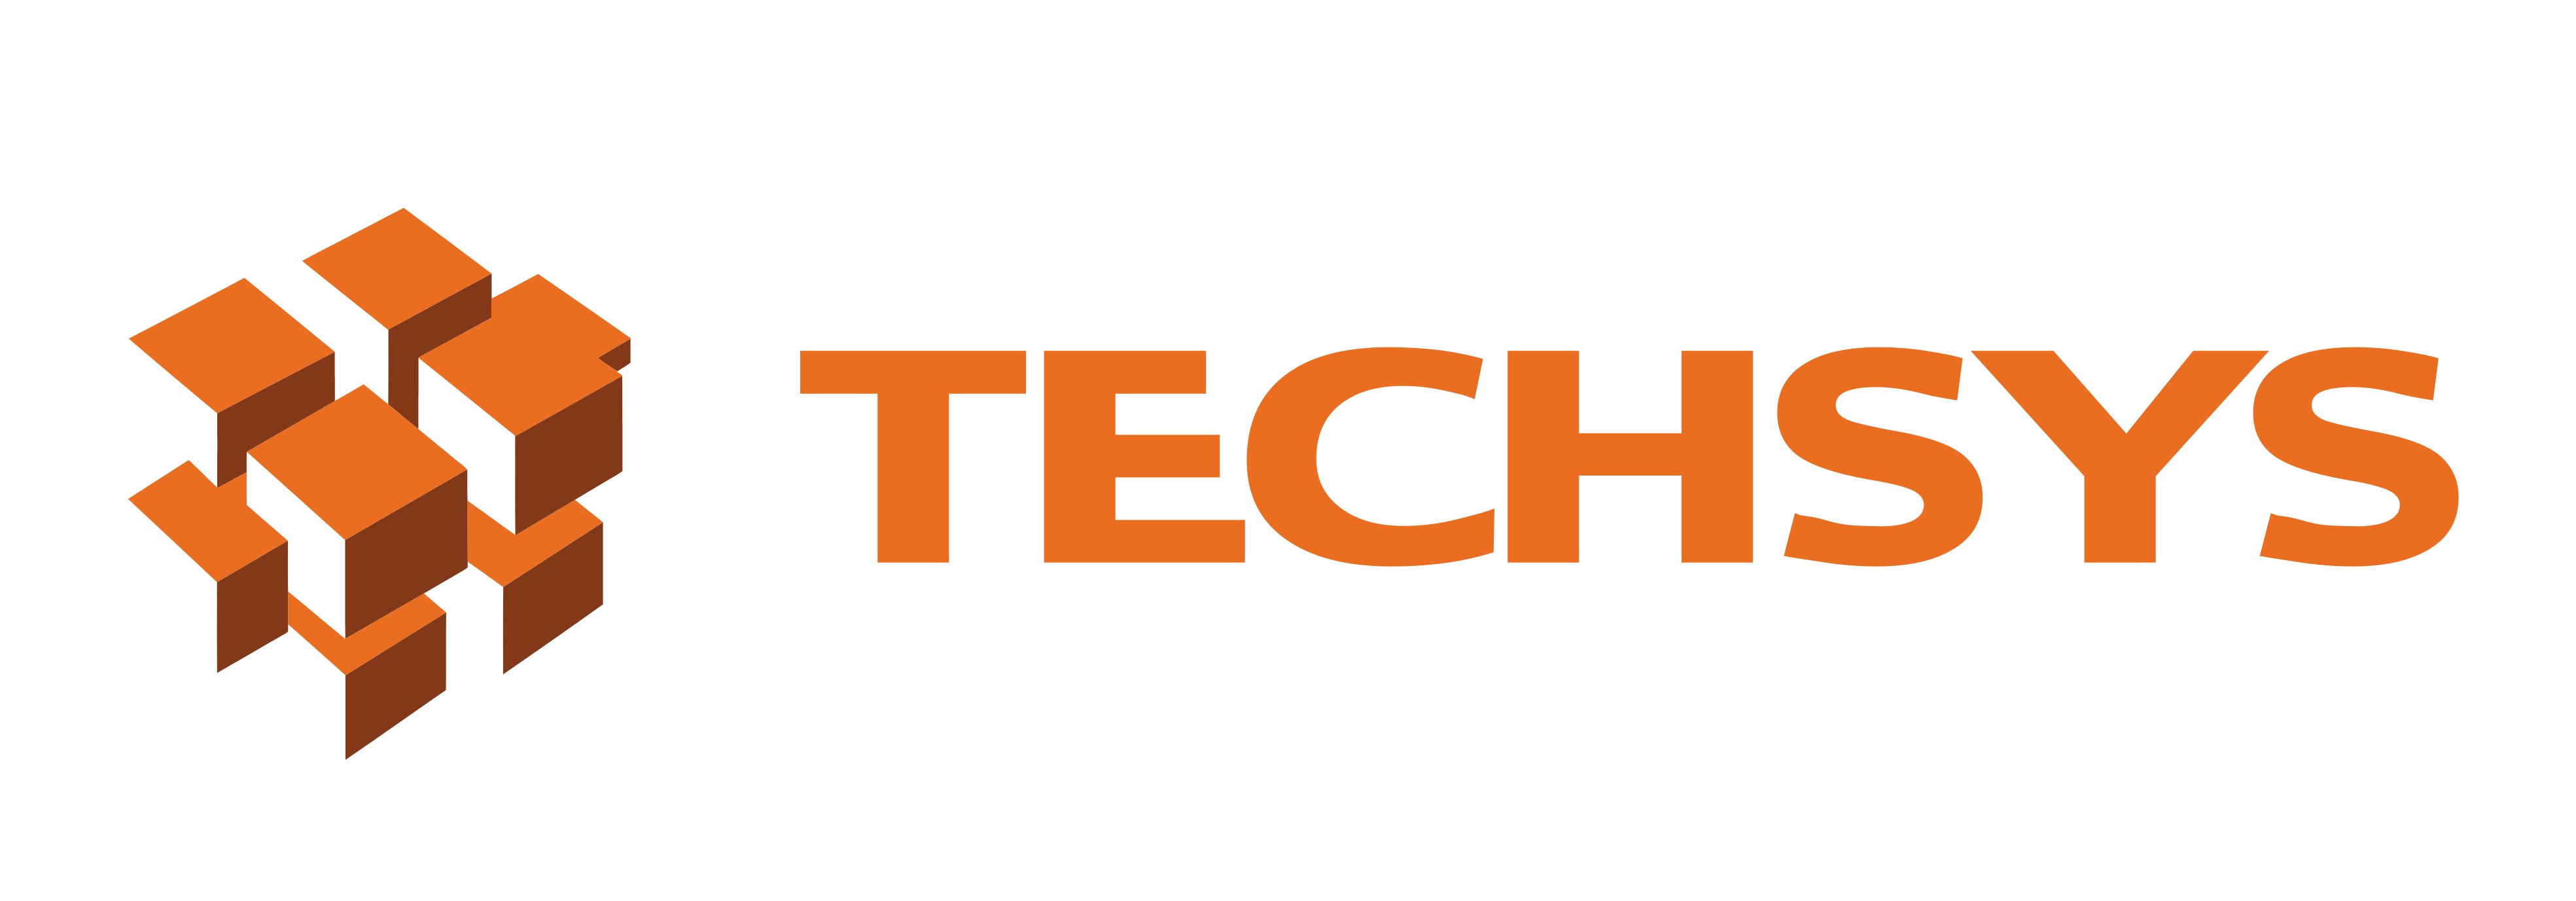 TECHSYS